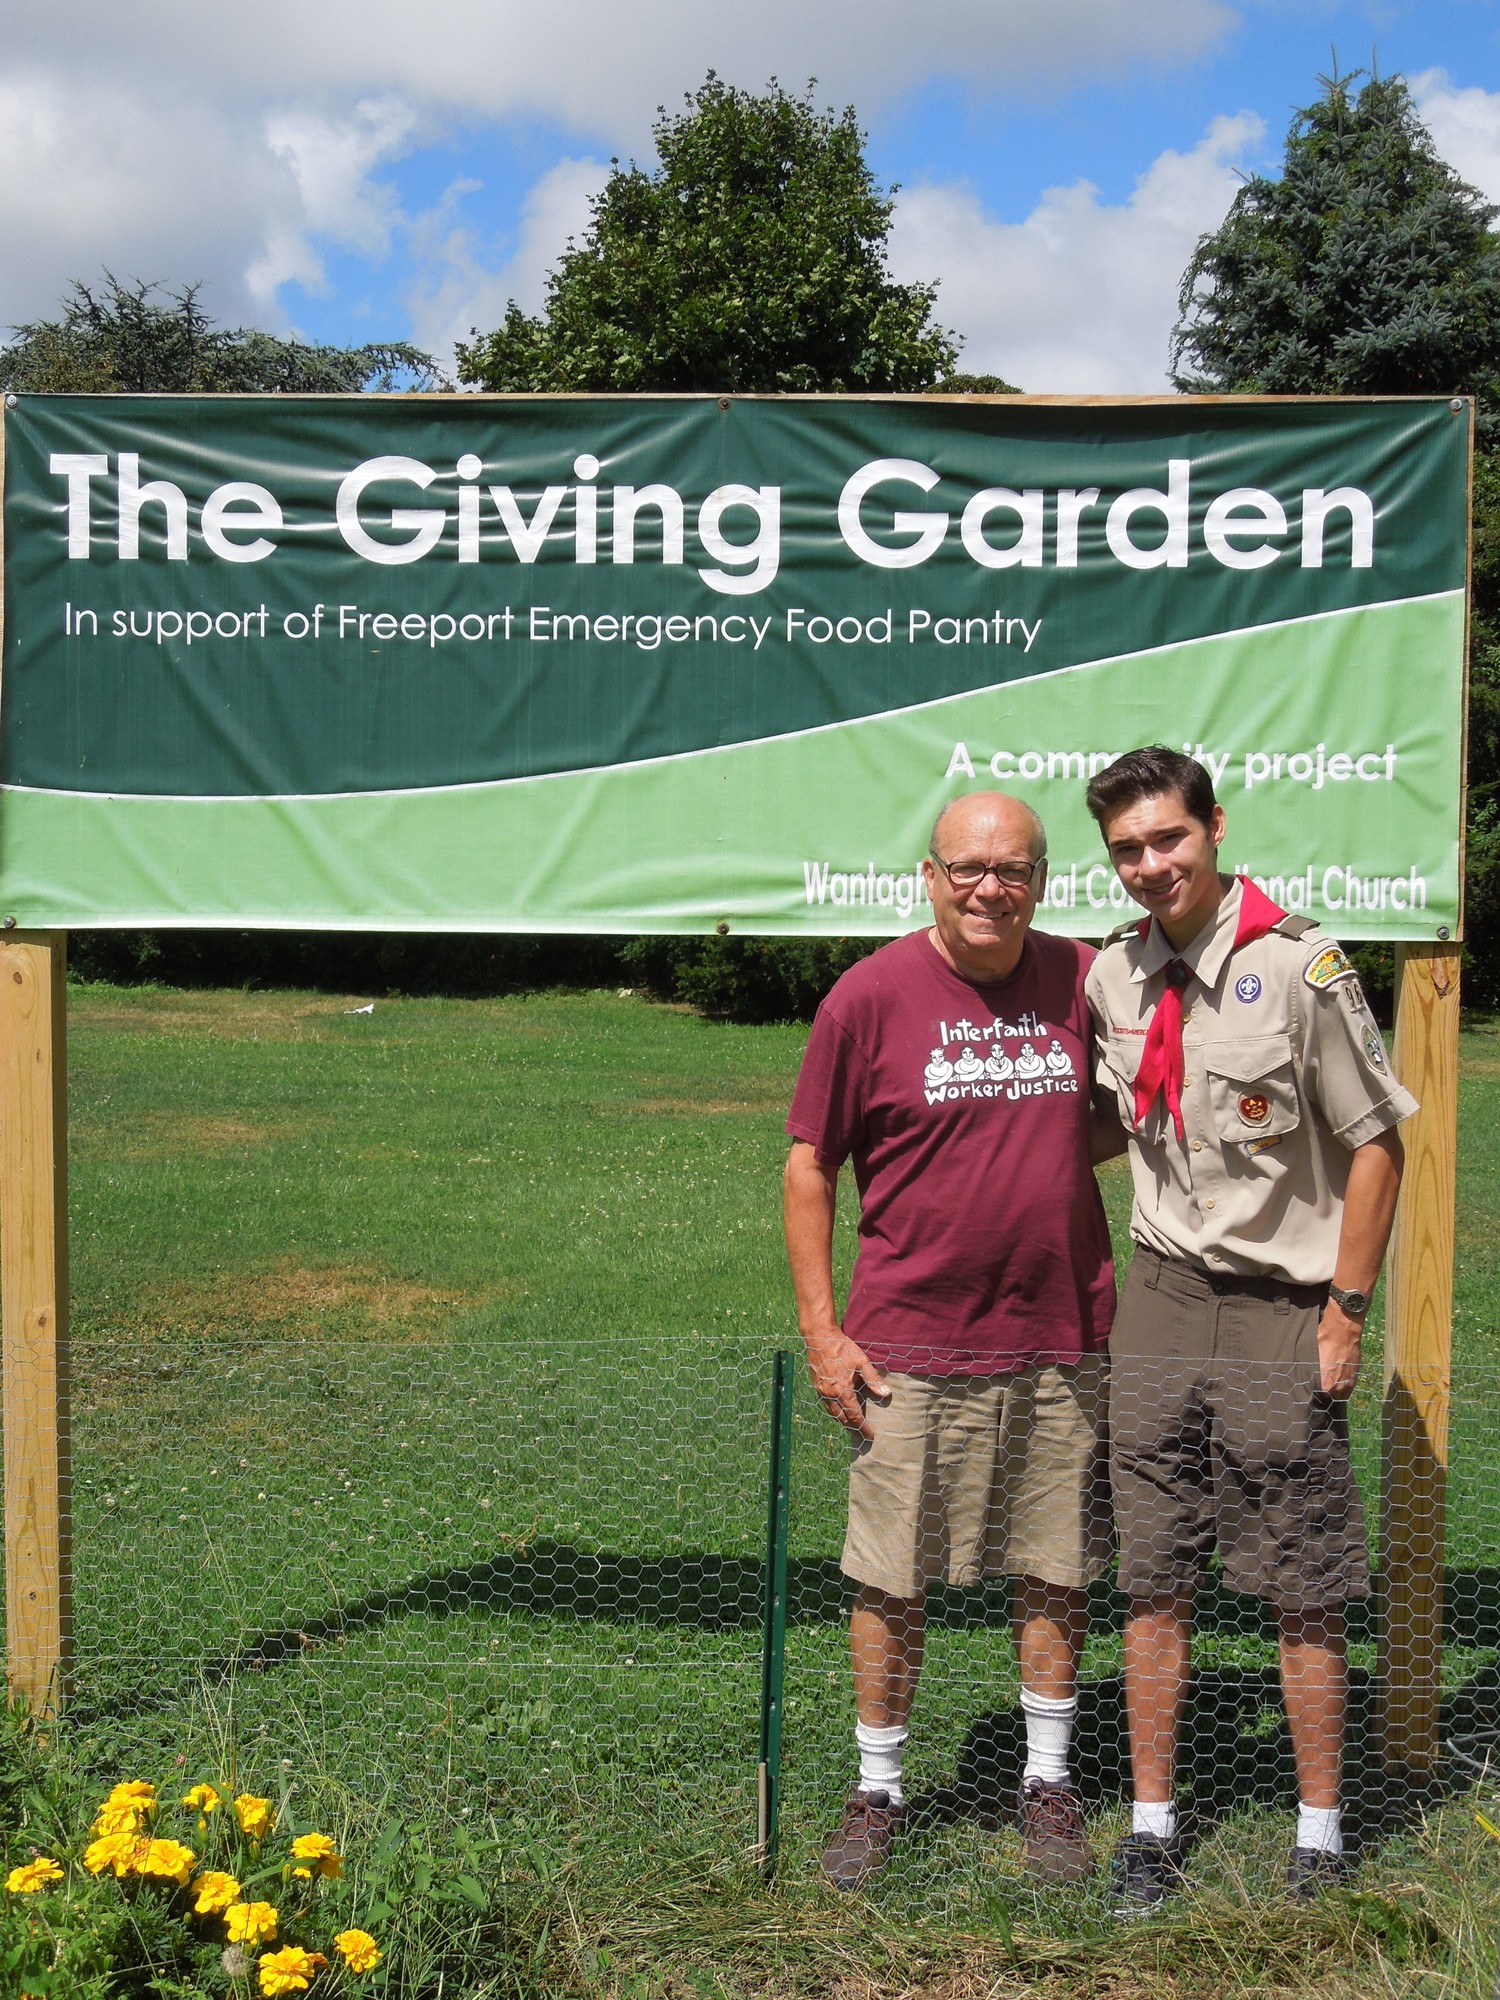 The Rev. Ron Garner, pastor of the Wantagh Memorial Congregational Church, and Troop 96 Boy Scout Brian Howe at the Giving Garden.